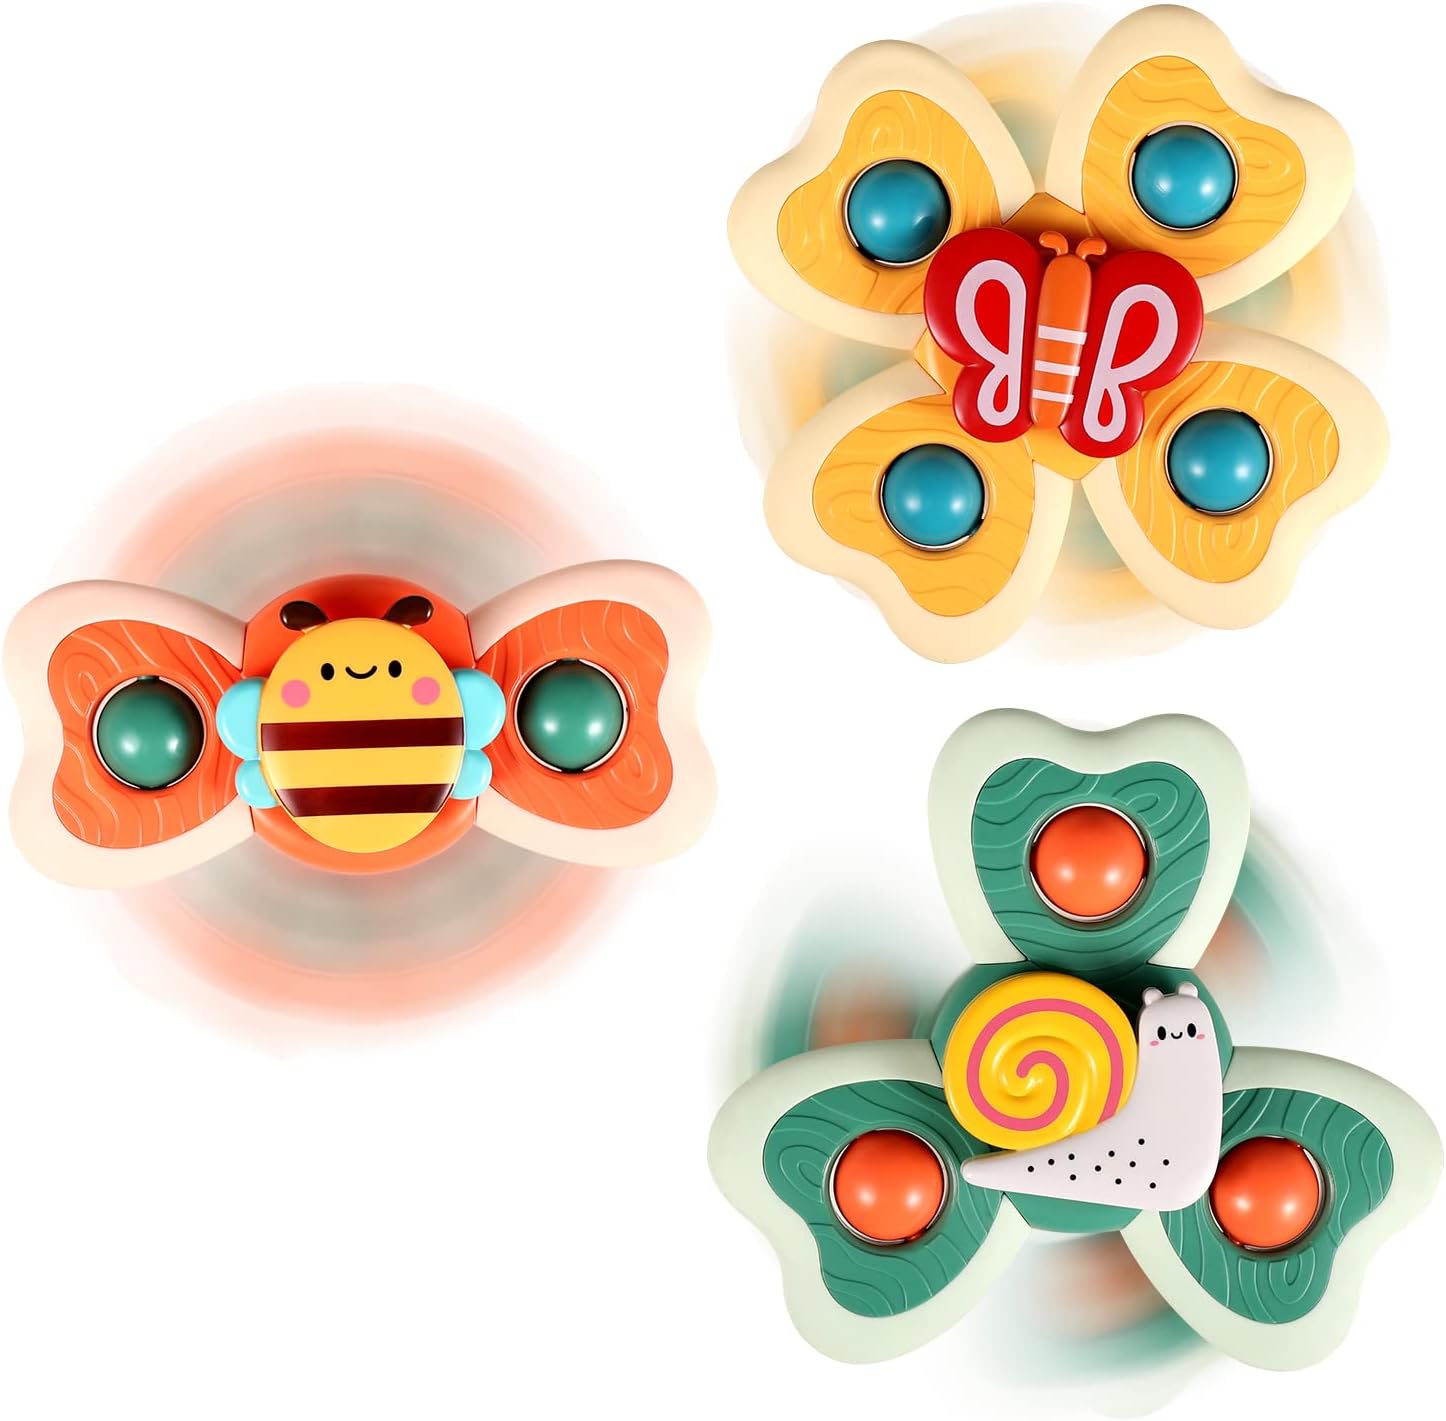 3PCS ALASOU Silicone Suction Cup Spinner Toys for Baby Christmas Stocking Stuffers Gifts|Novelty Spinning Tops Bath Toys for Kids Ages 1-3|Sensory Toys for Toddlers 1-3 Year Old Boy Birthday Gift